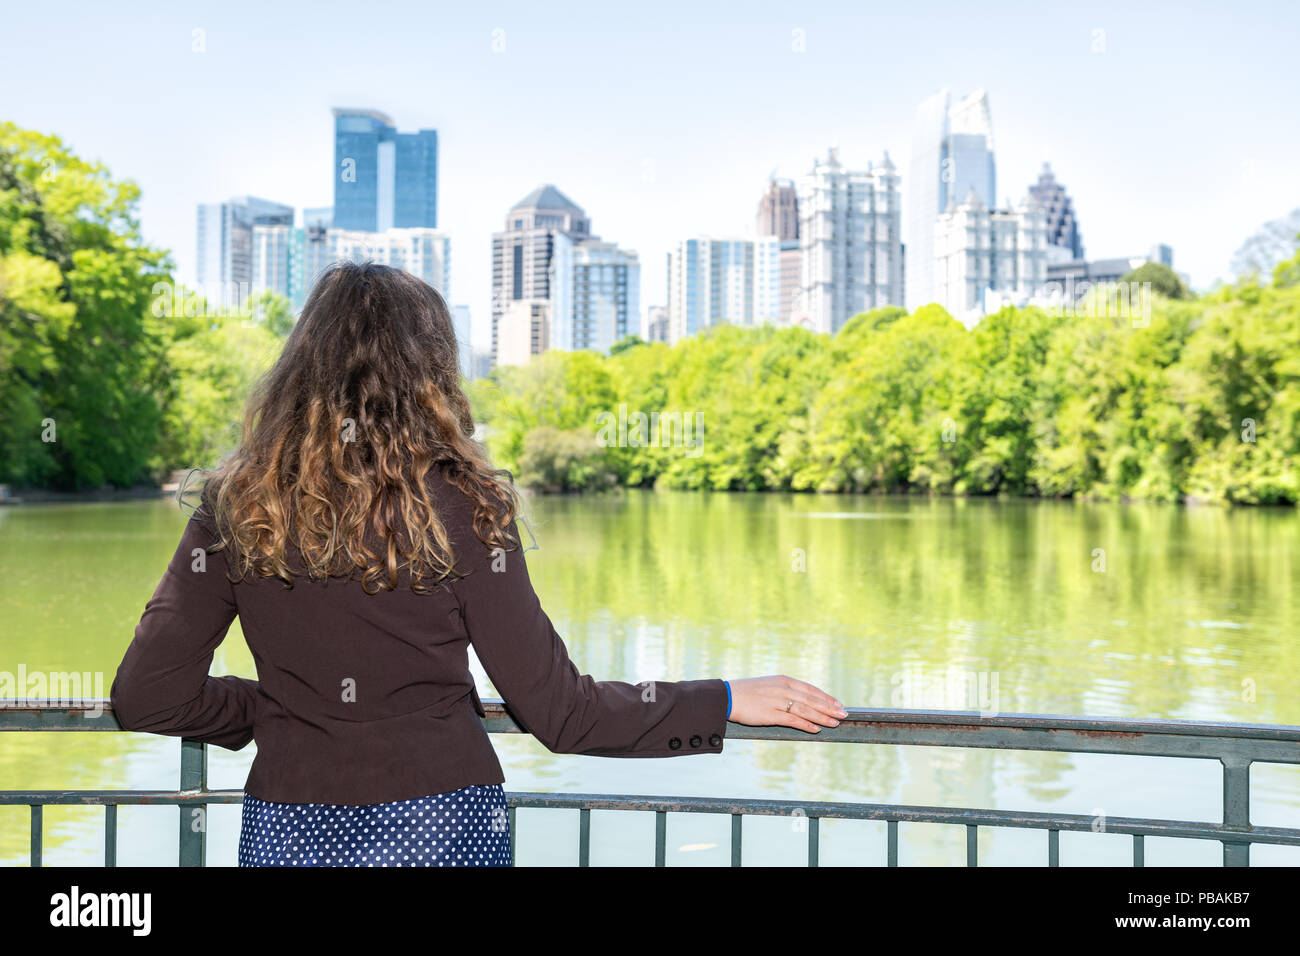 Young woman standing in Piedmont Park in Atlanta, Georgia looking at scenery, water, and cityscape skyline of urban city skyscrapers downtown, Lake Cl Stock Photo